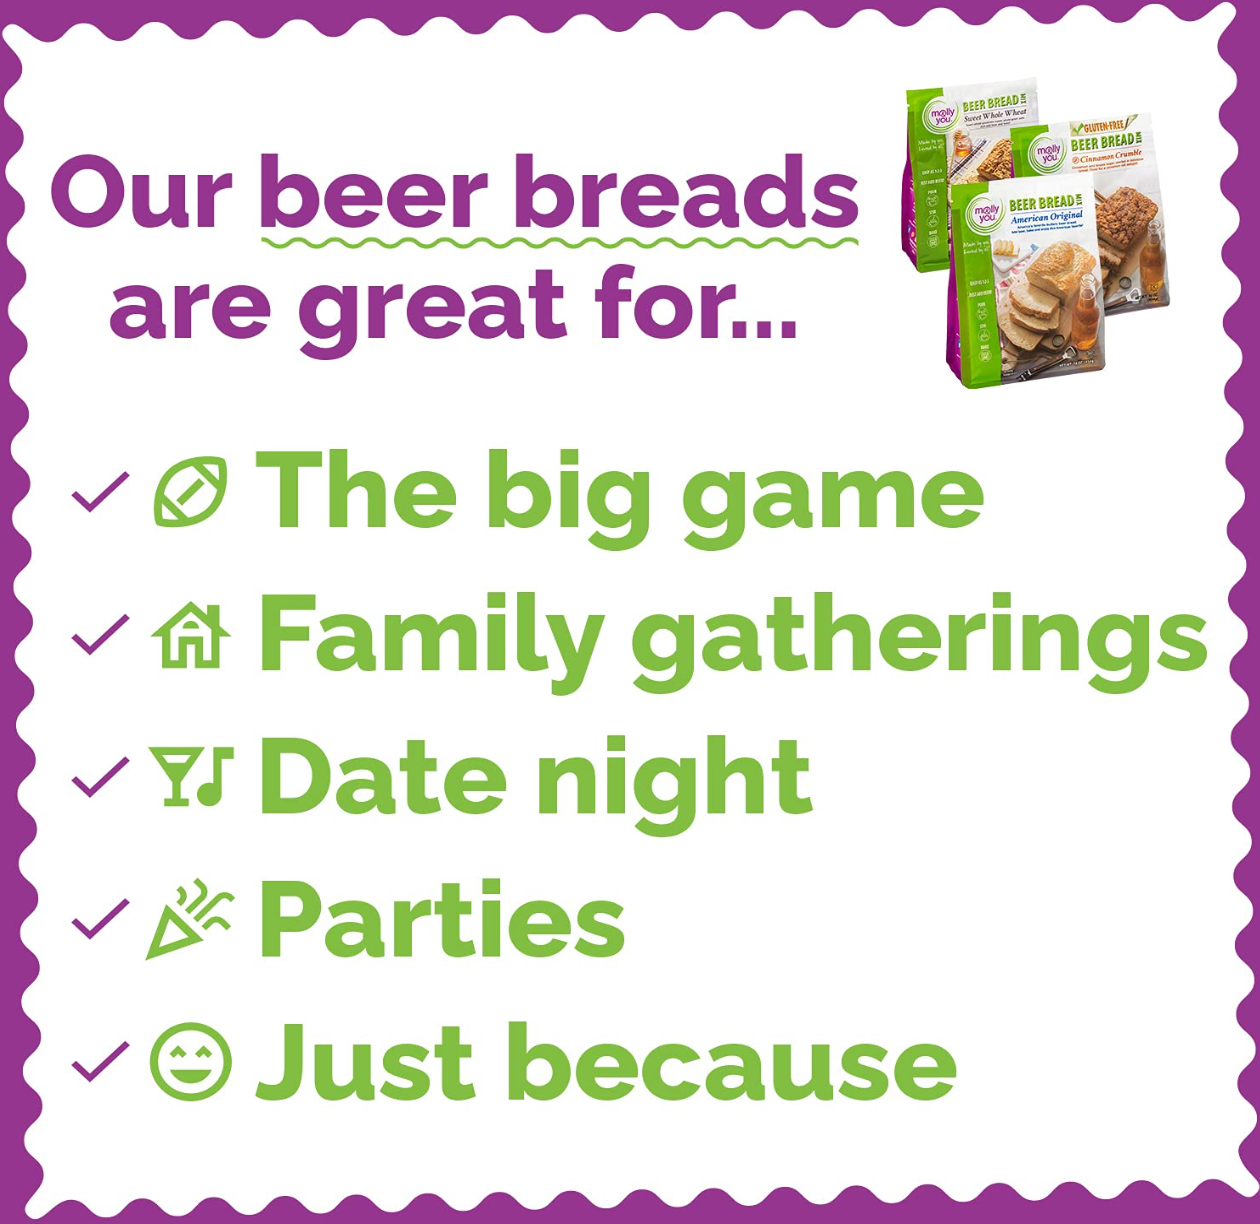 Our Beer Breads are great for... the big game, family gatherings, date night, parties, and just because!